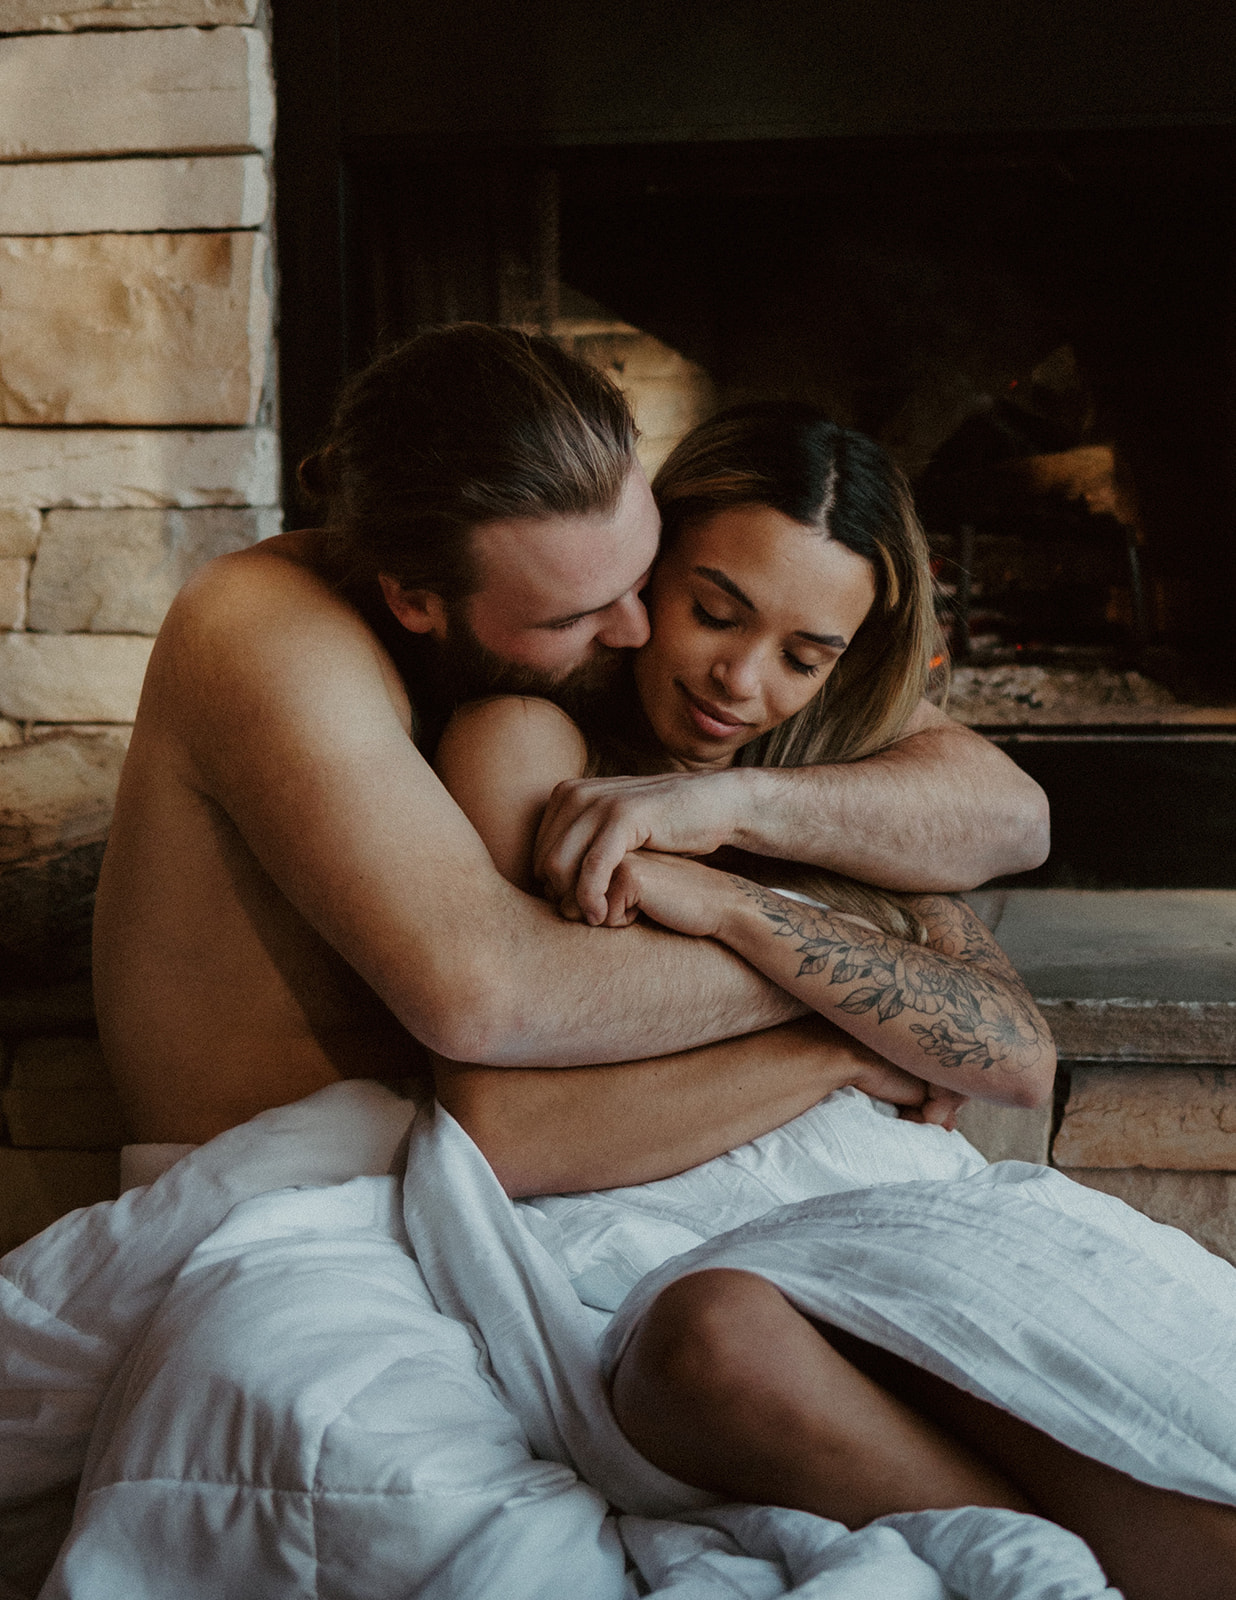 the couple wrapped up in a hug by the fireplace